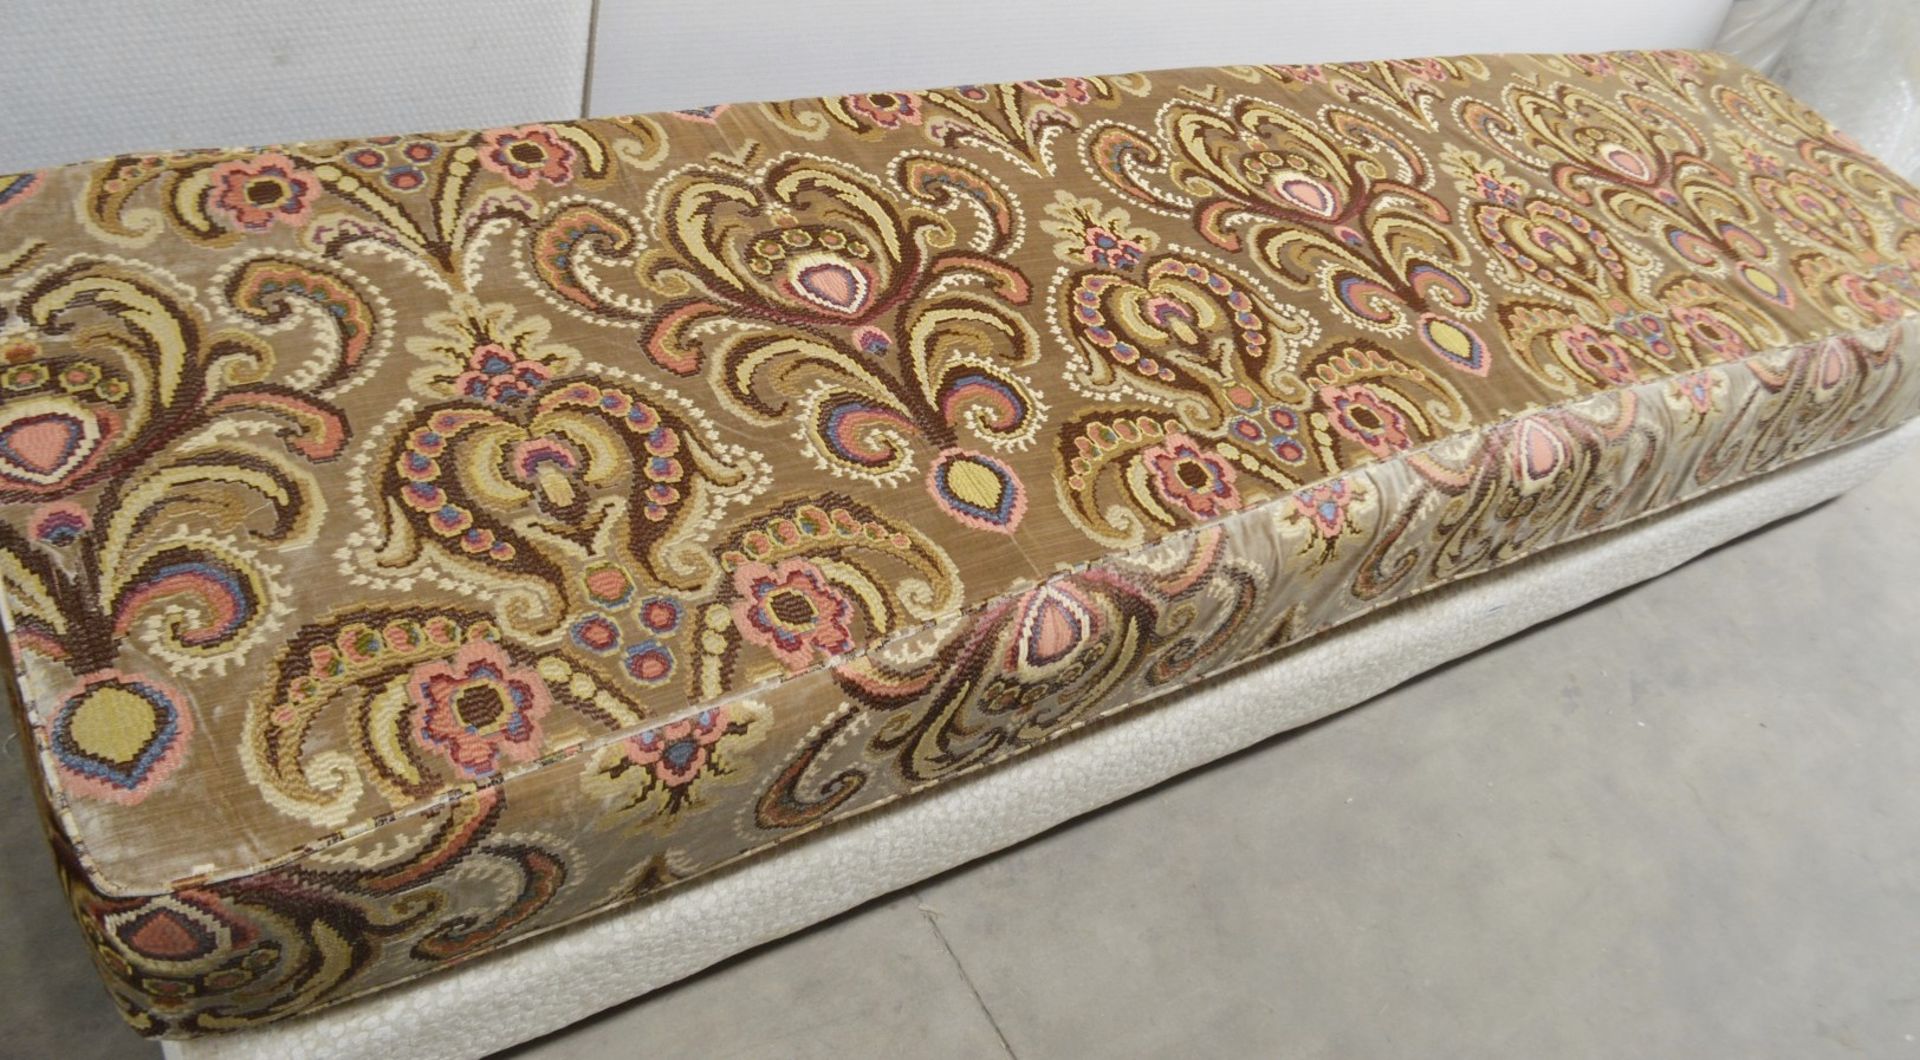 1 x Impressive 9ft Long Moroccan-style Seating Bench With Matching Footstool And 6 x Scatter - Image 3 of 9